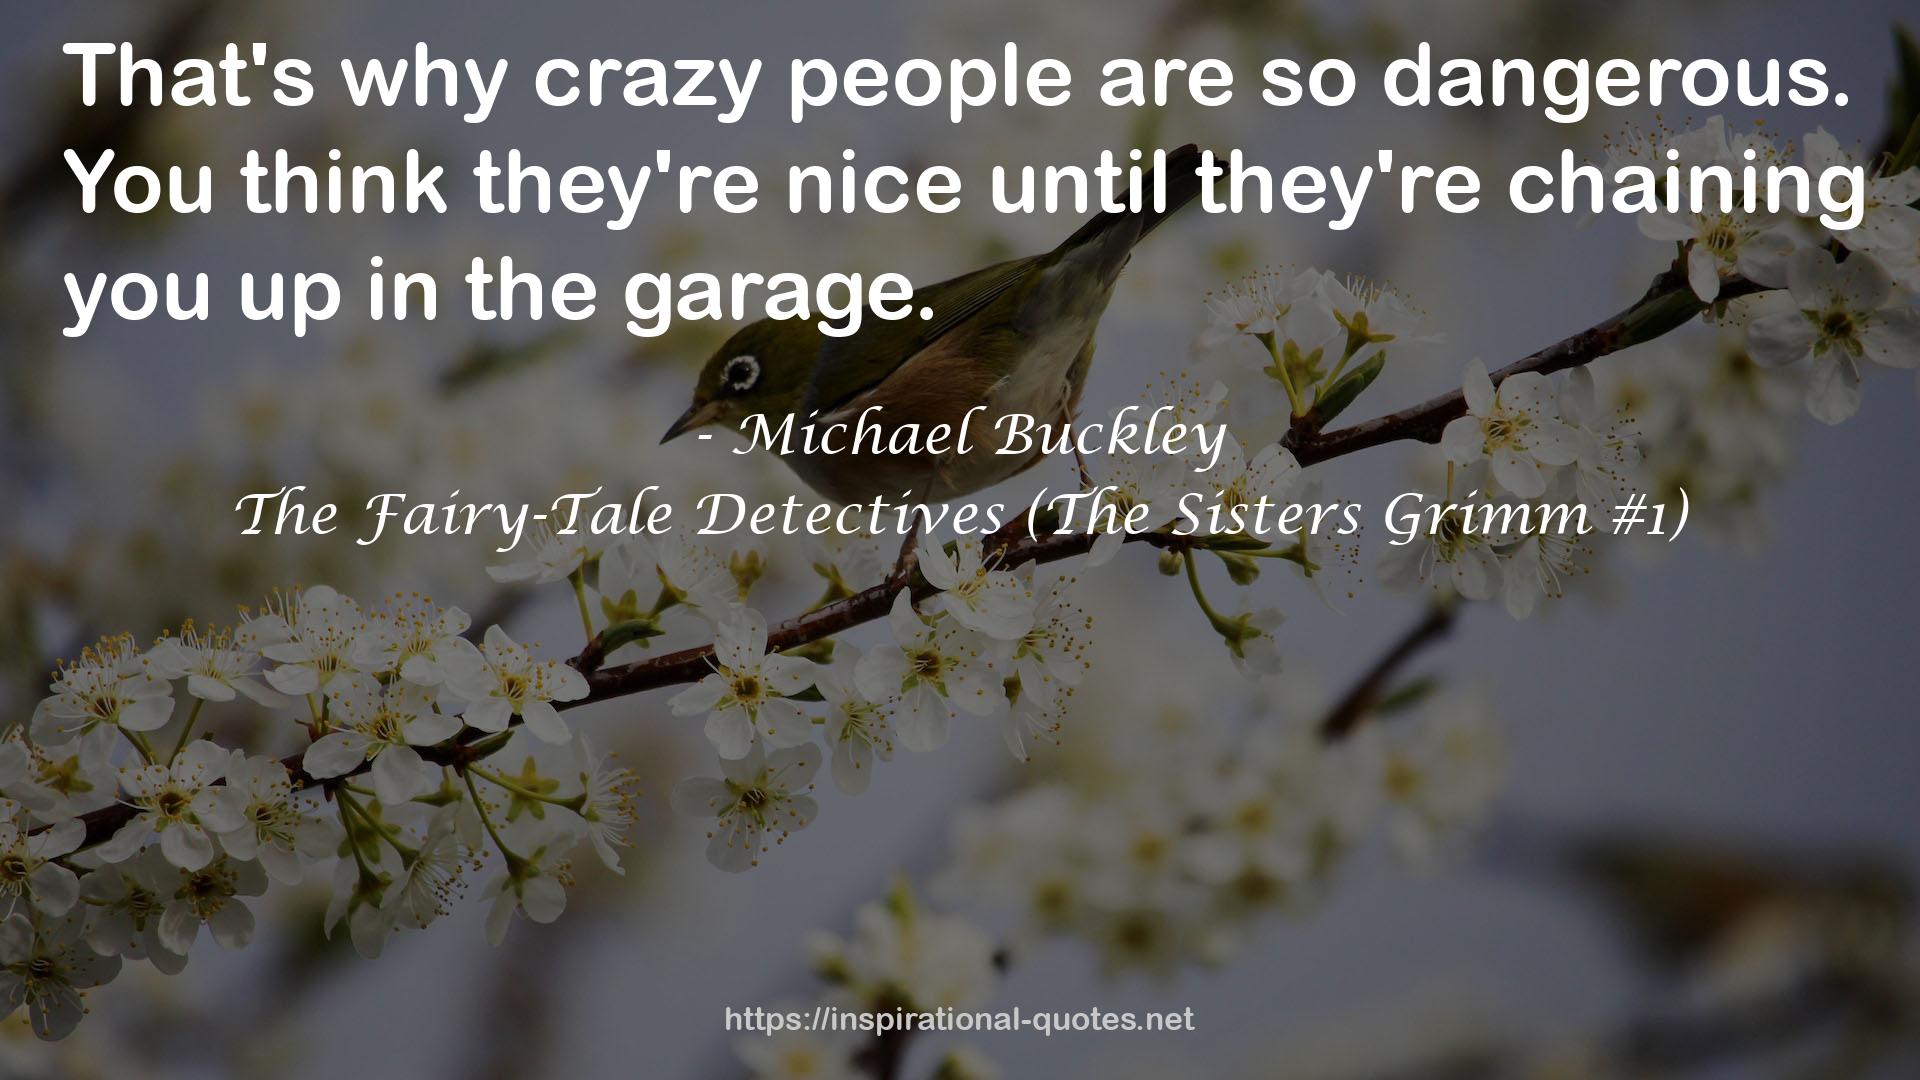 The Fairy-Tale Detectives (The Sisters Grimm #1) QUOTES